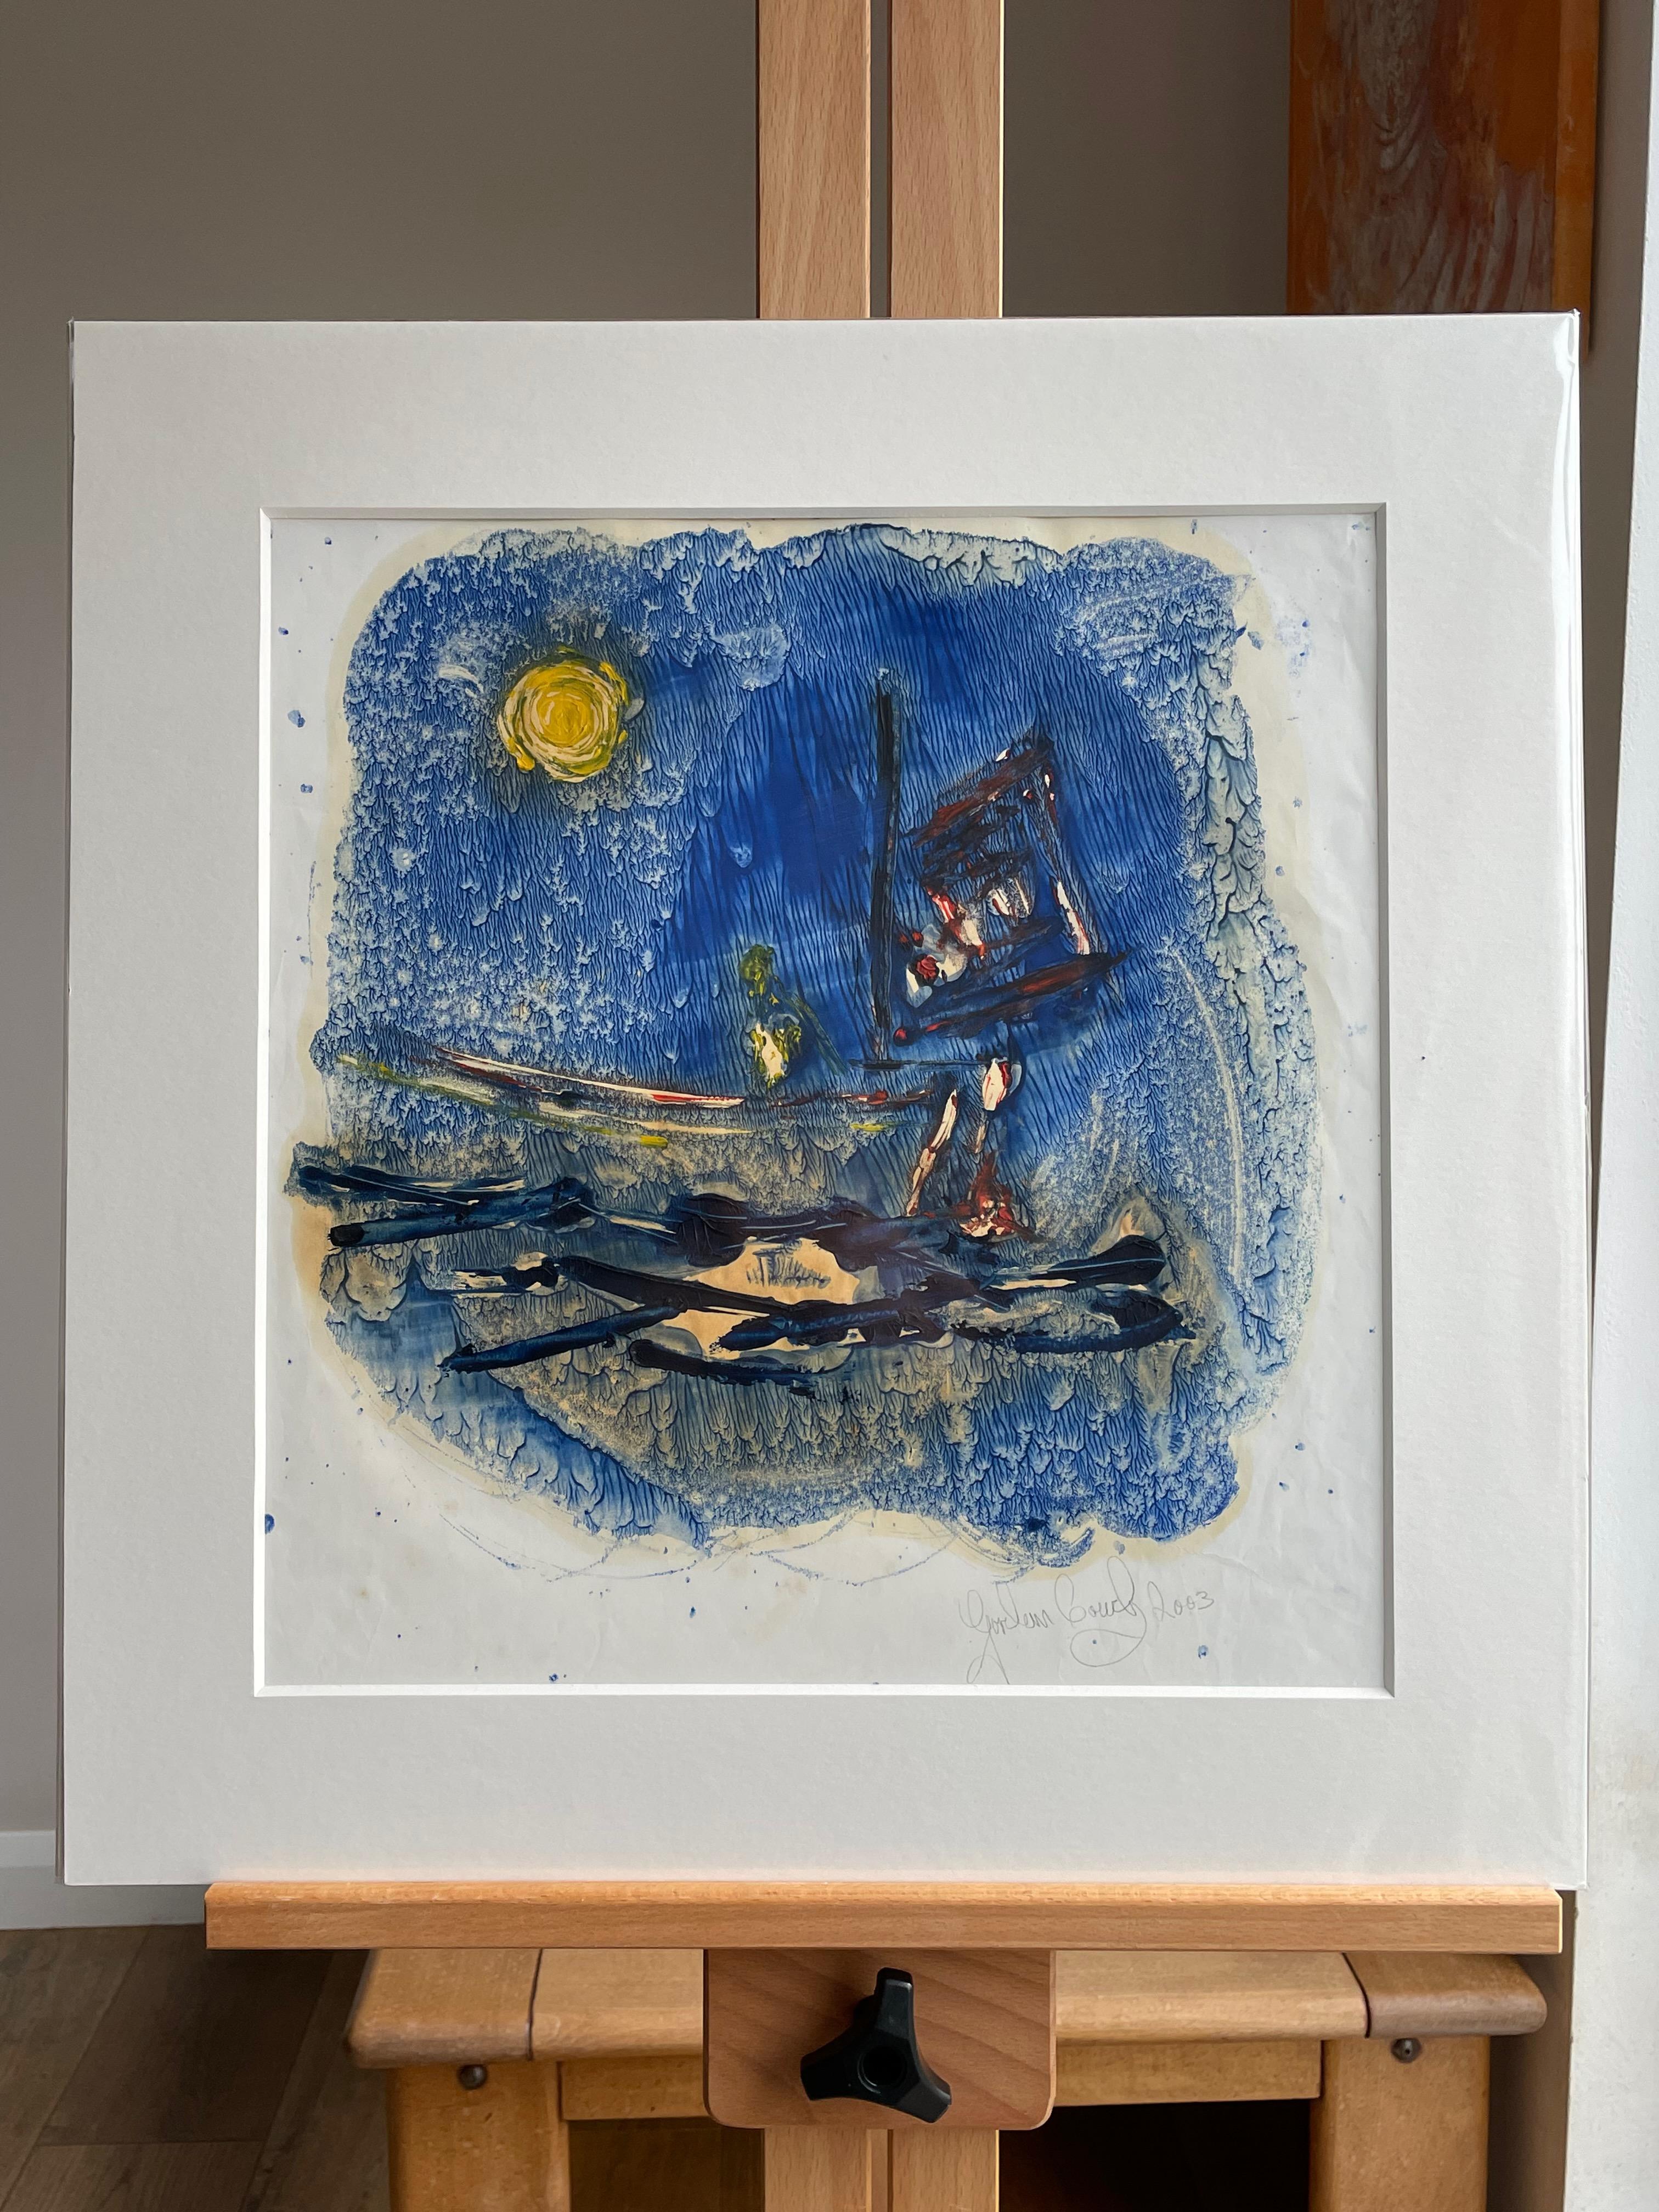 Abstract expressionist seascape on paper. Boats gently rocking in the sunshine give a real feel good element to this piece. This work was created under the guidance of the great English artist Sir Terry Frost and his influence is evident here